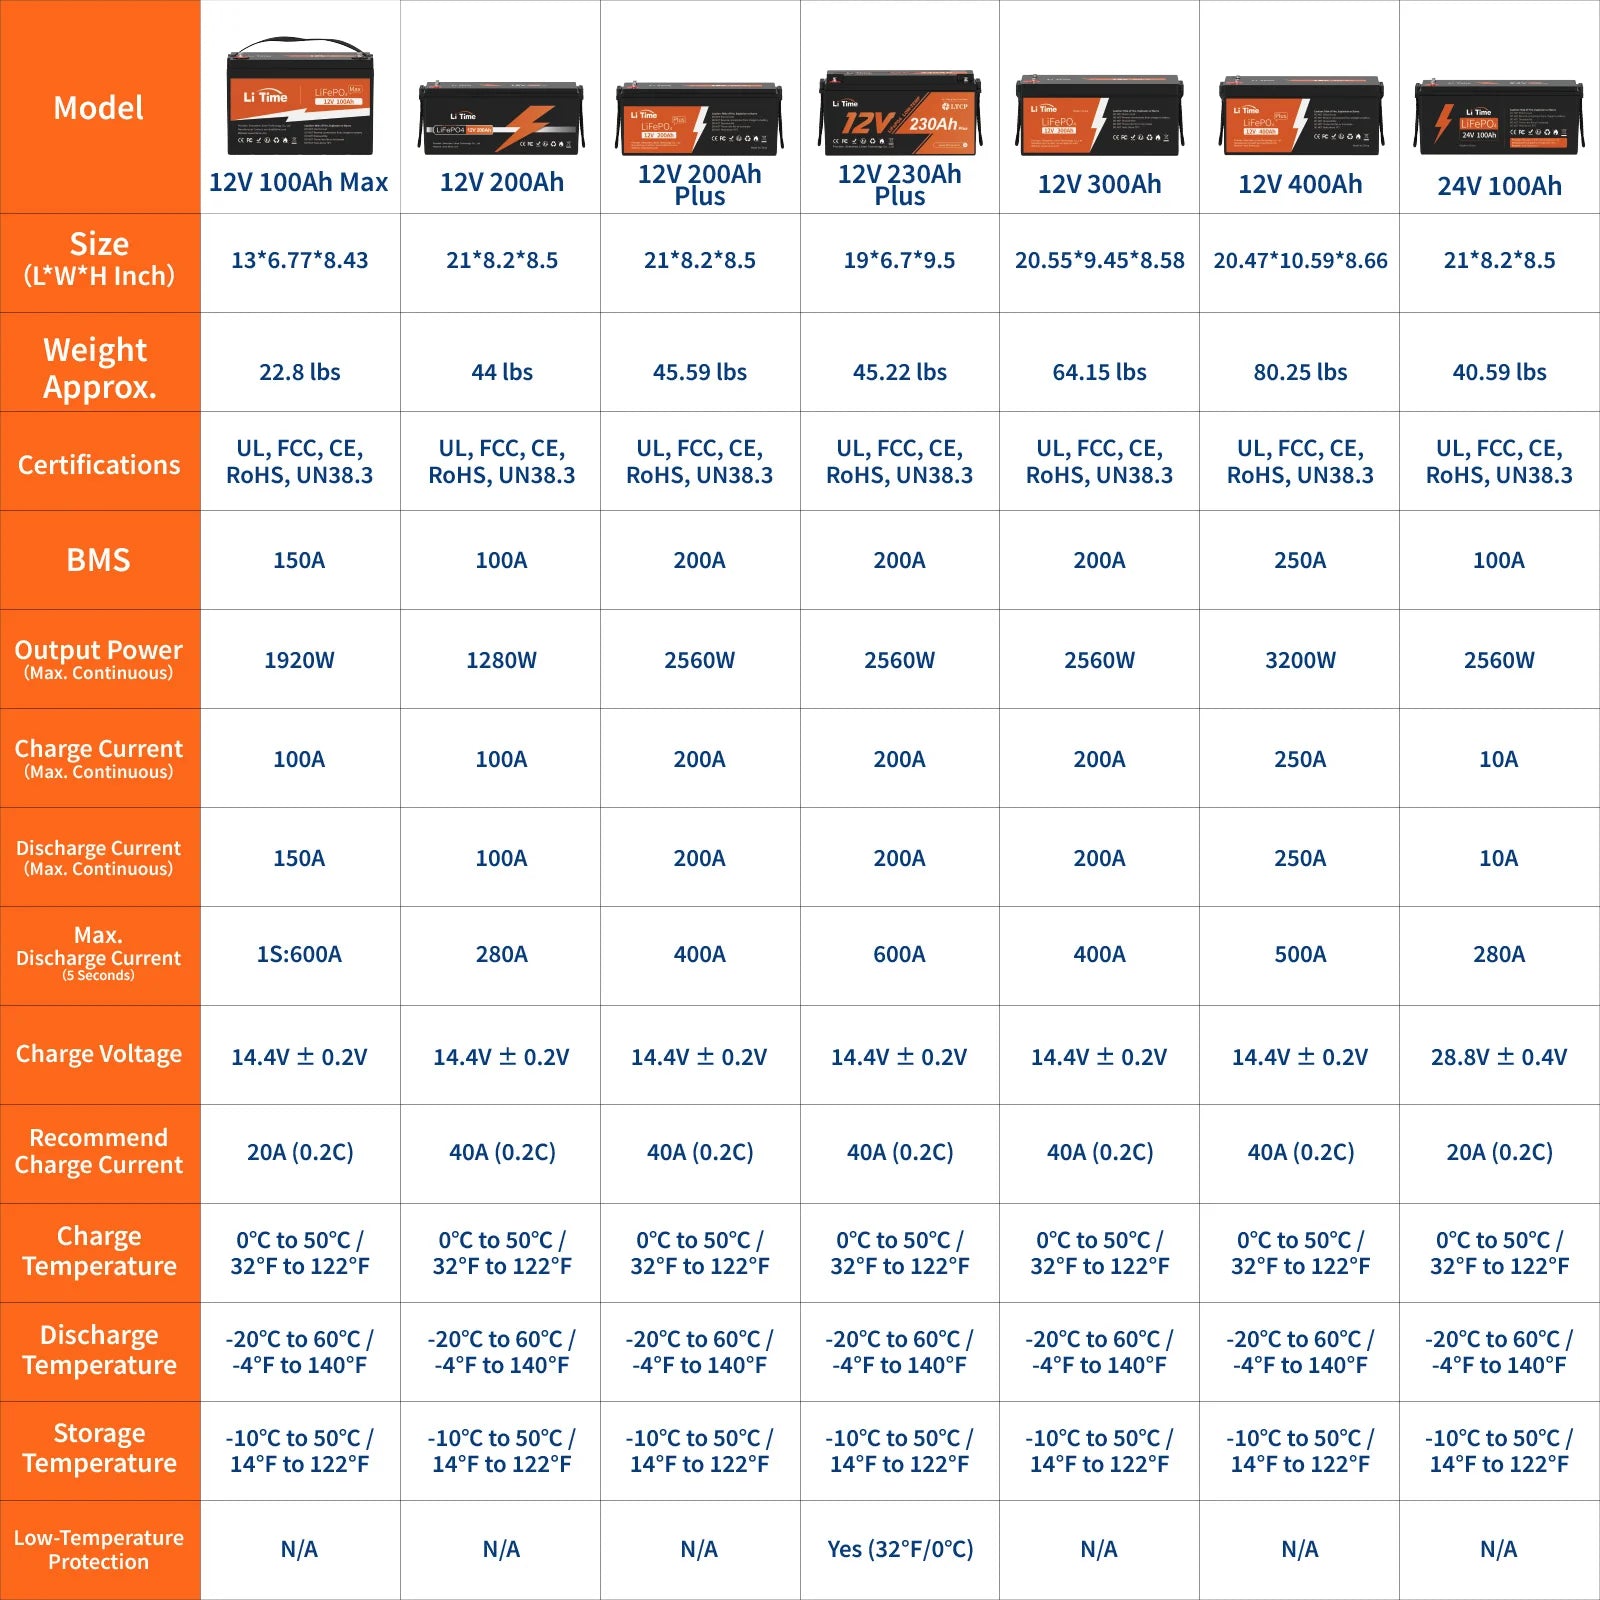 litime comparison of various battery types